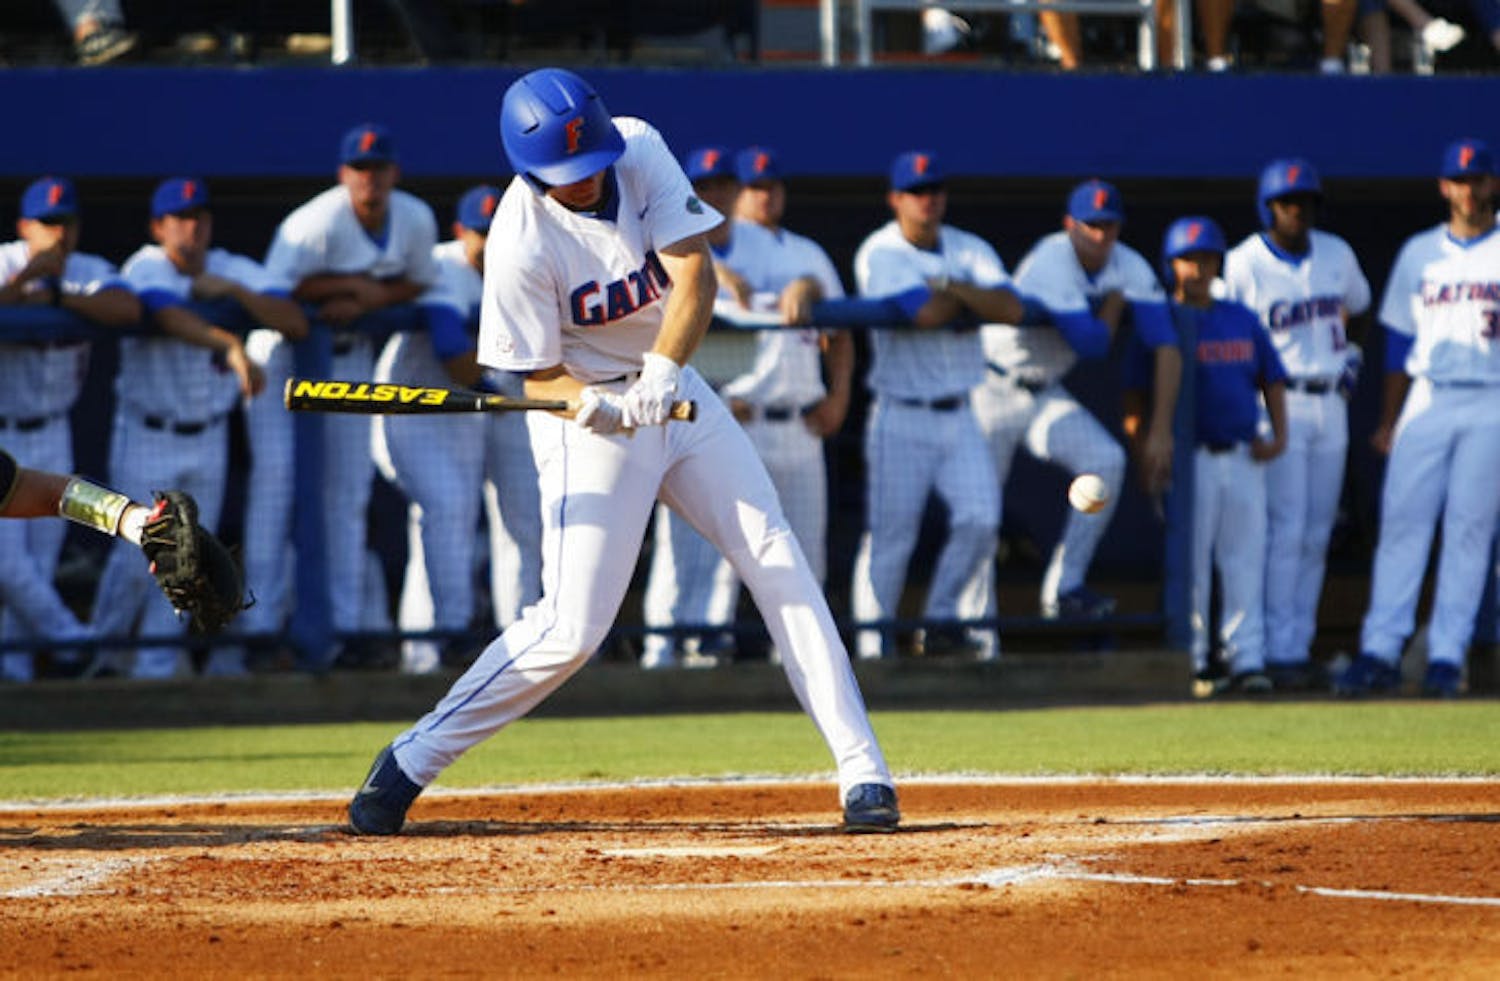 Sophomore Justin Shafer bats during Florida’s 6-2 win against Georgia Tech in the NCAA Gainesville Regional on June 2, 2012, at McKethan Stadium. Shafer notched a three-RBI homer during the sixth inning in Florida's 4-3 NCAA Regional loss to Austin Peay on Friday in Bloomington, Ind.&nbsp;
